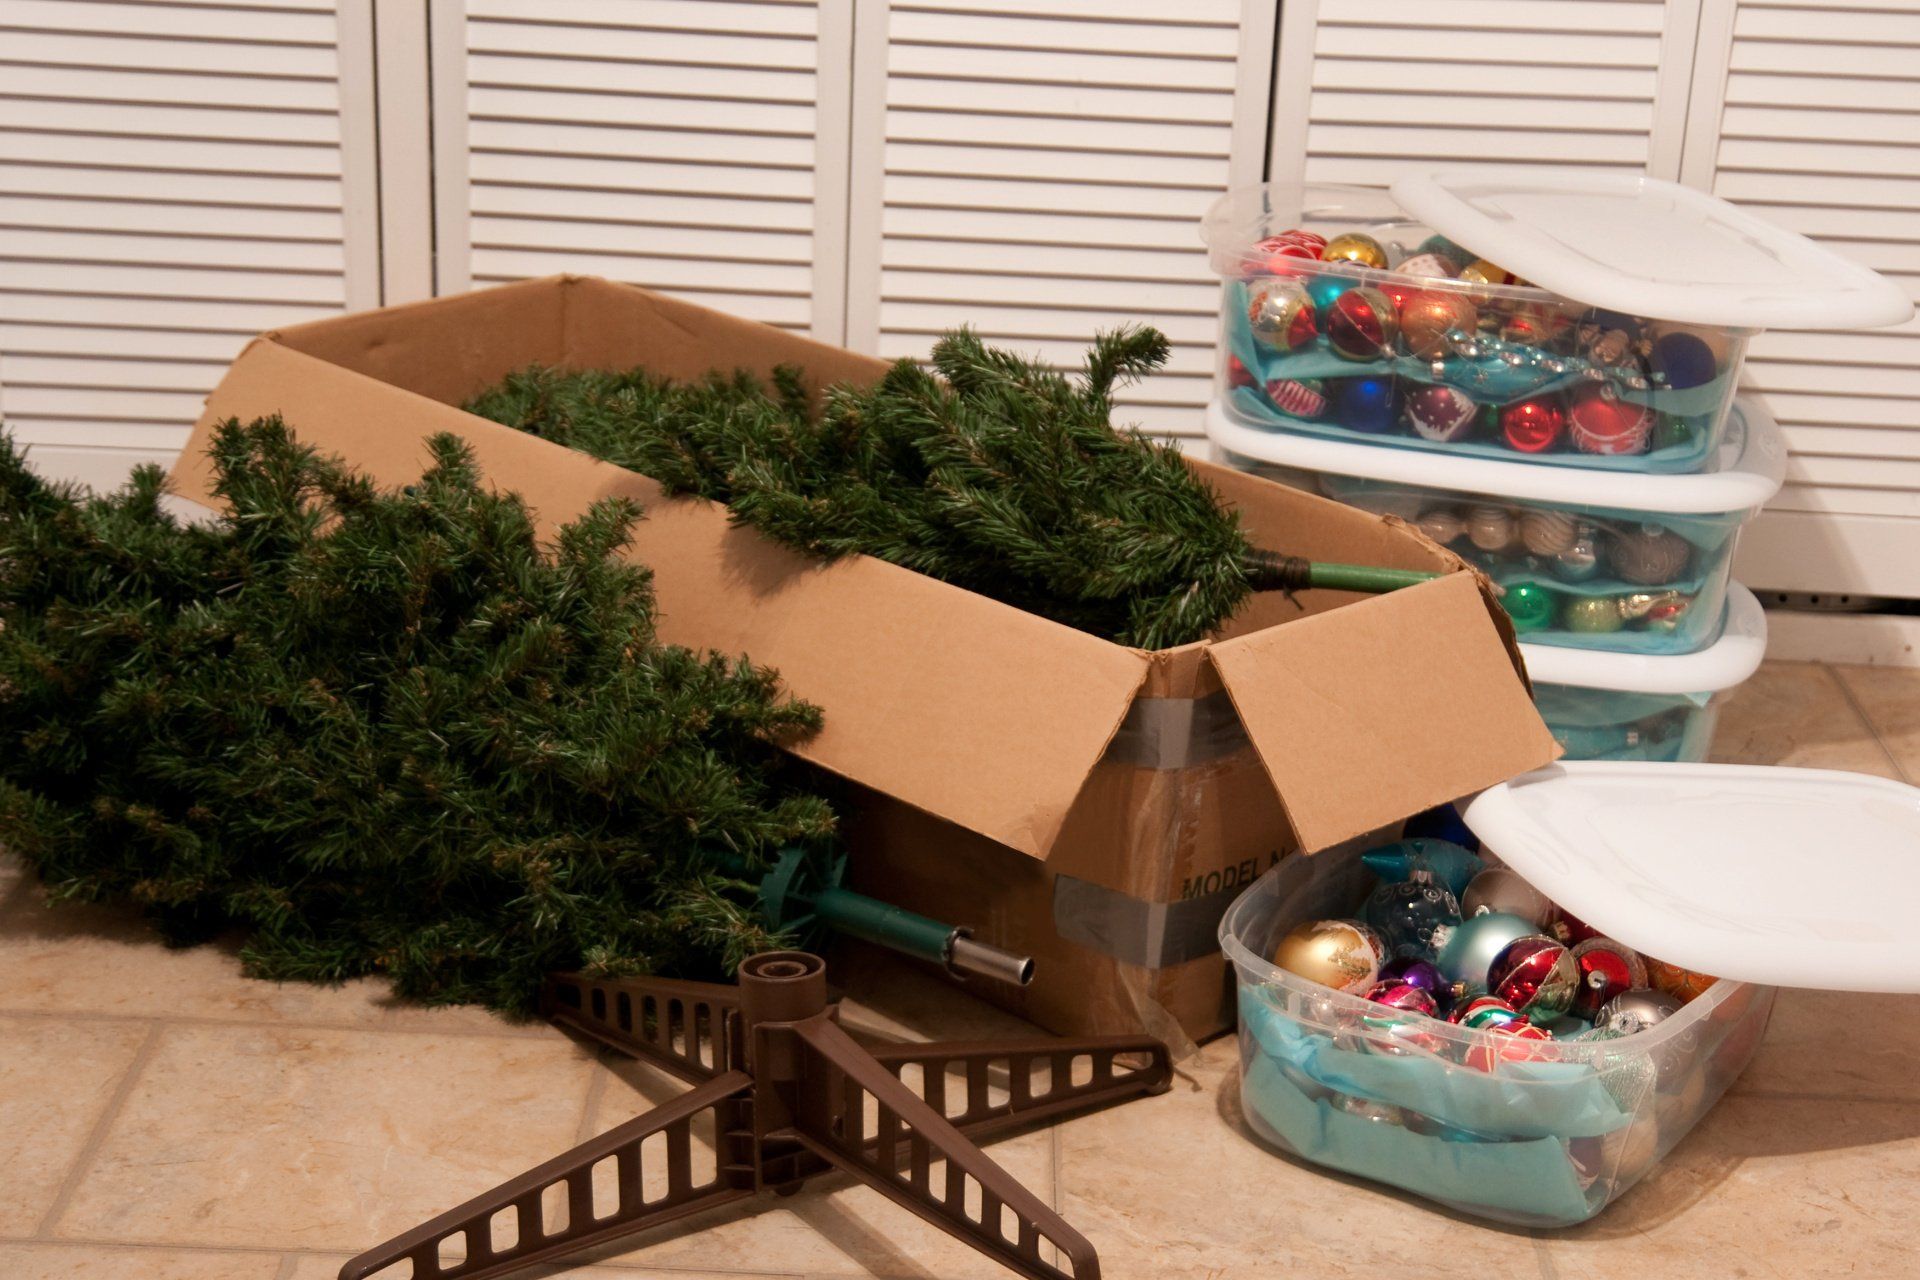 Christmas decorations partially packed after the holidays